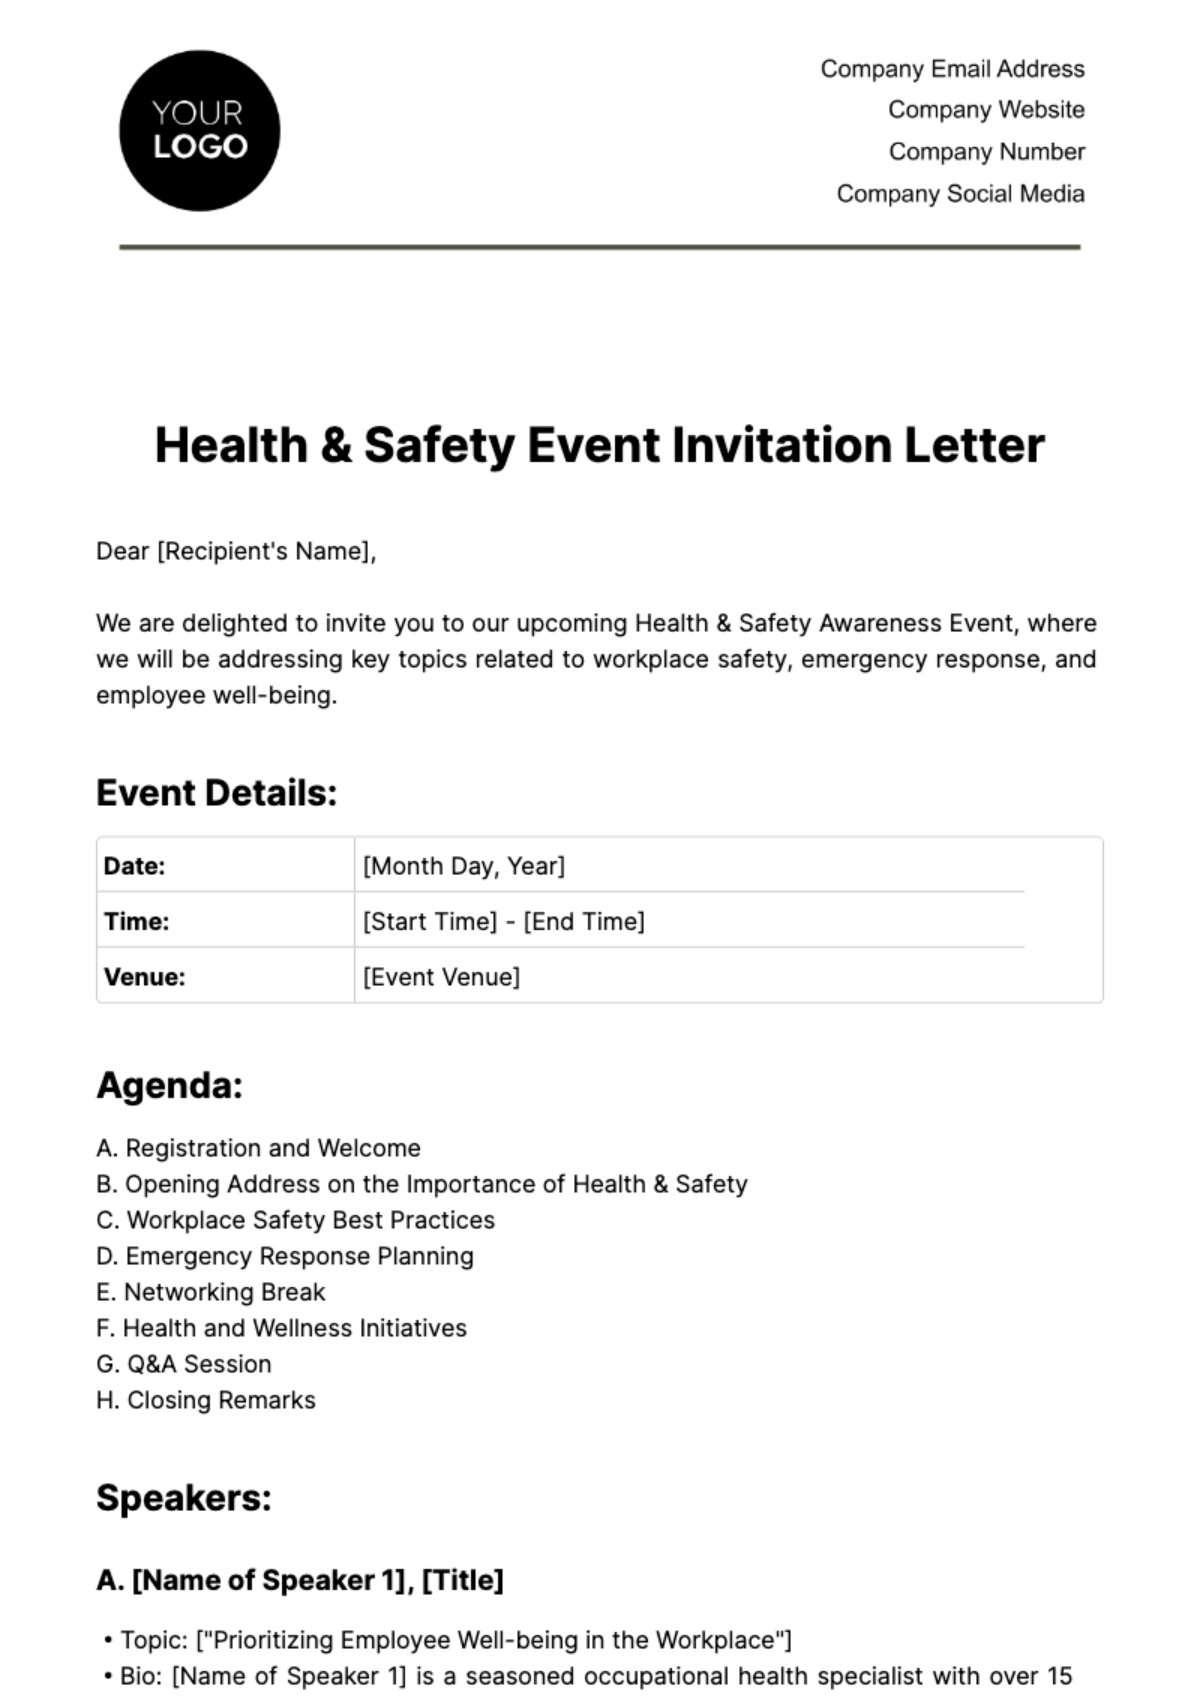 Health & Safety Event Invitation Letter Template